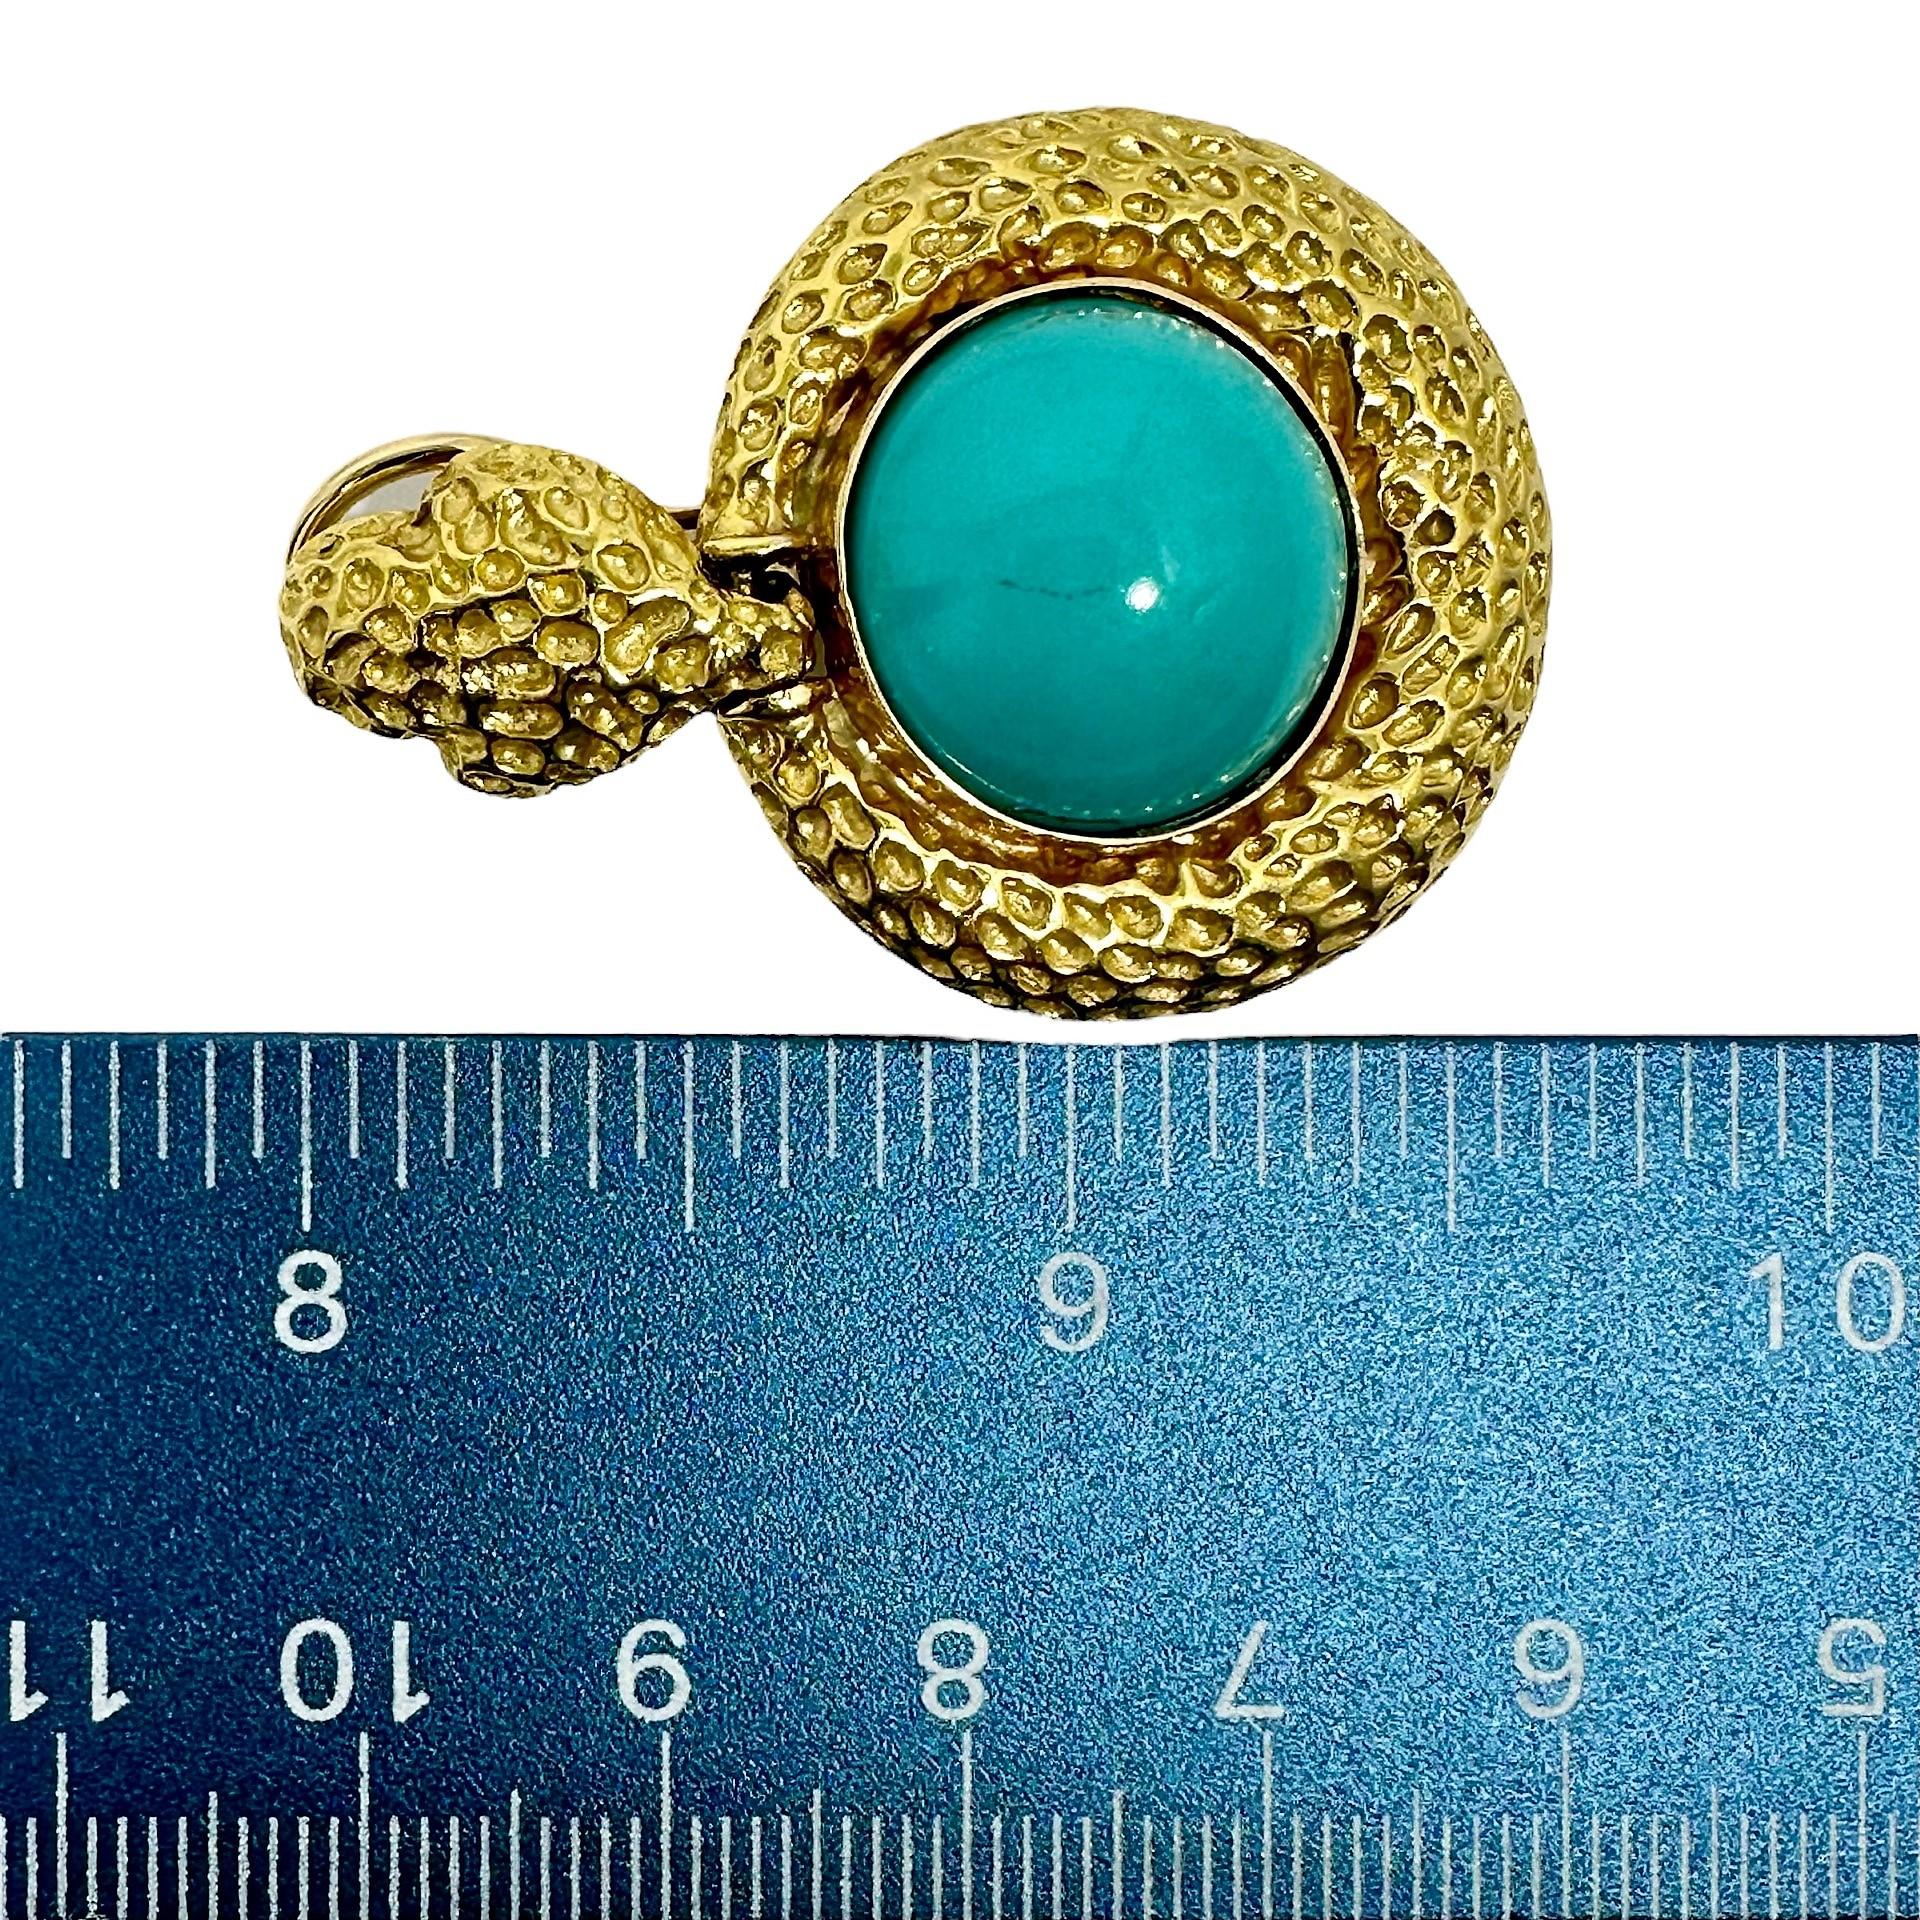 Spritzer & Fuhrmann Vintage Gold Door Knocker Earrings with Persian Turquoise In Good Condition For Sale In Palm Beach, FL